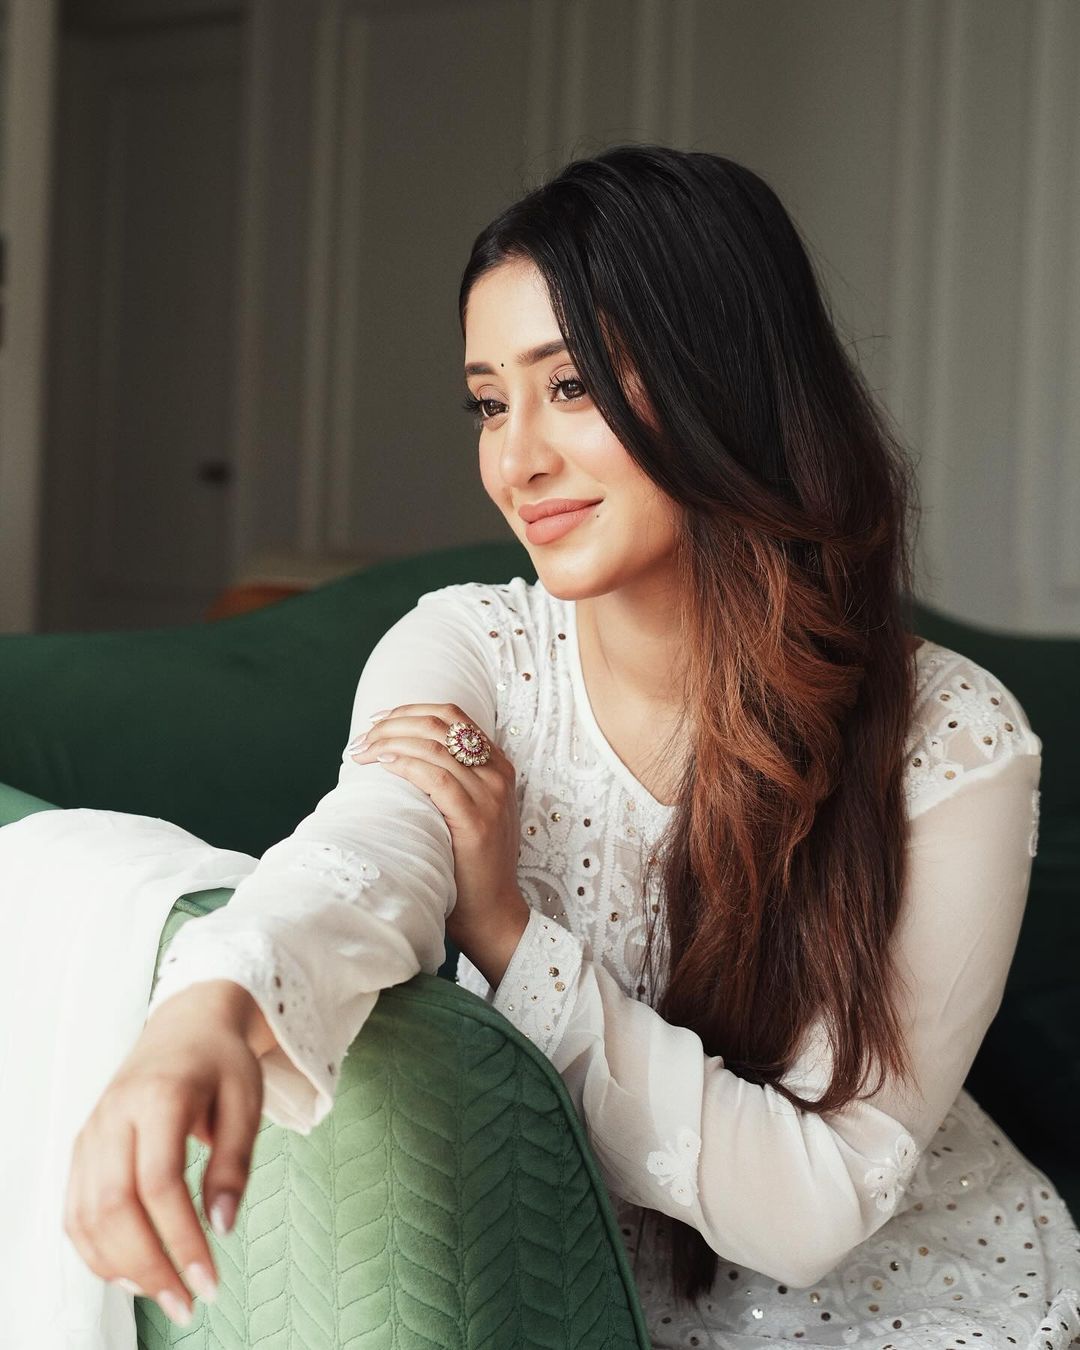 Shivangi Joshi Welcomes This New Year In Cute White Chikankari Suit. She Pens Down A Sweet Note And Bids Farewell To 2023!